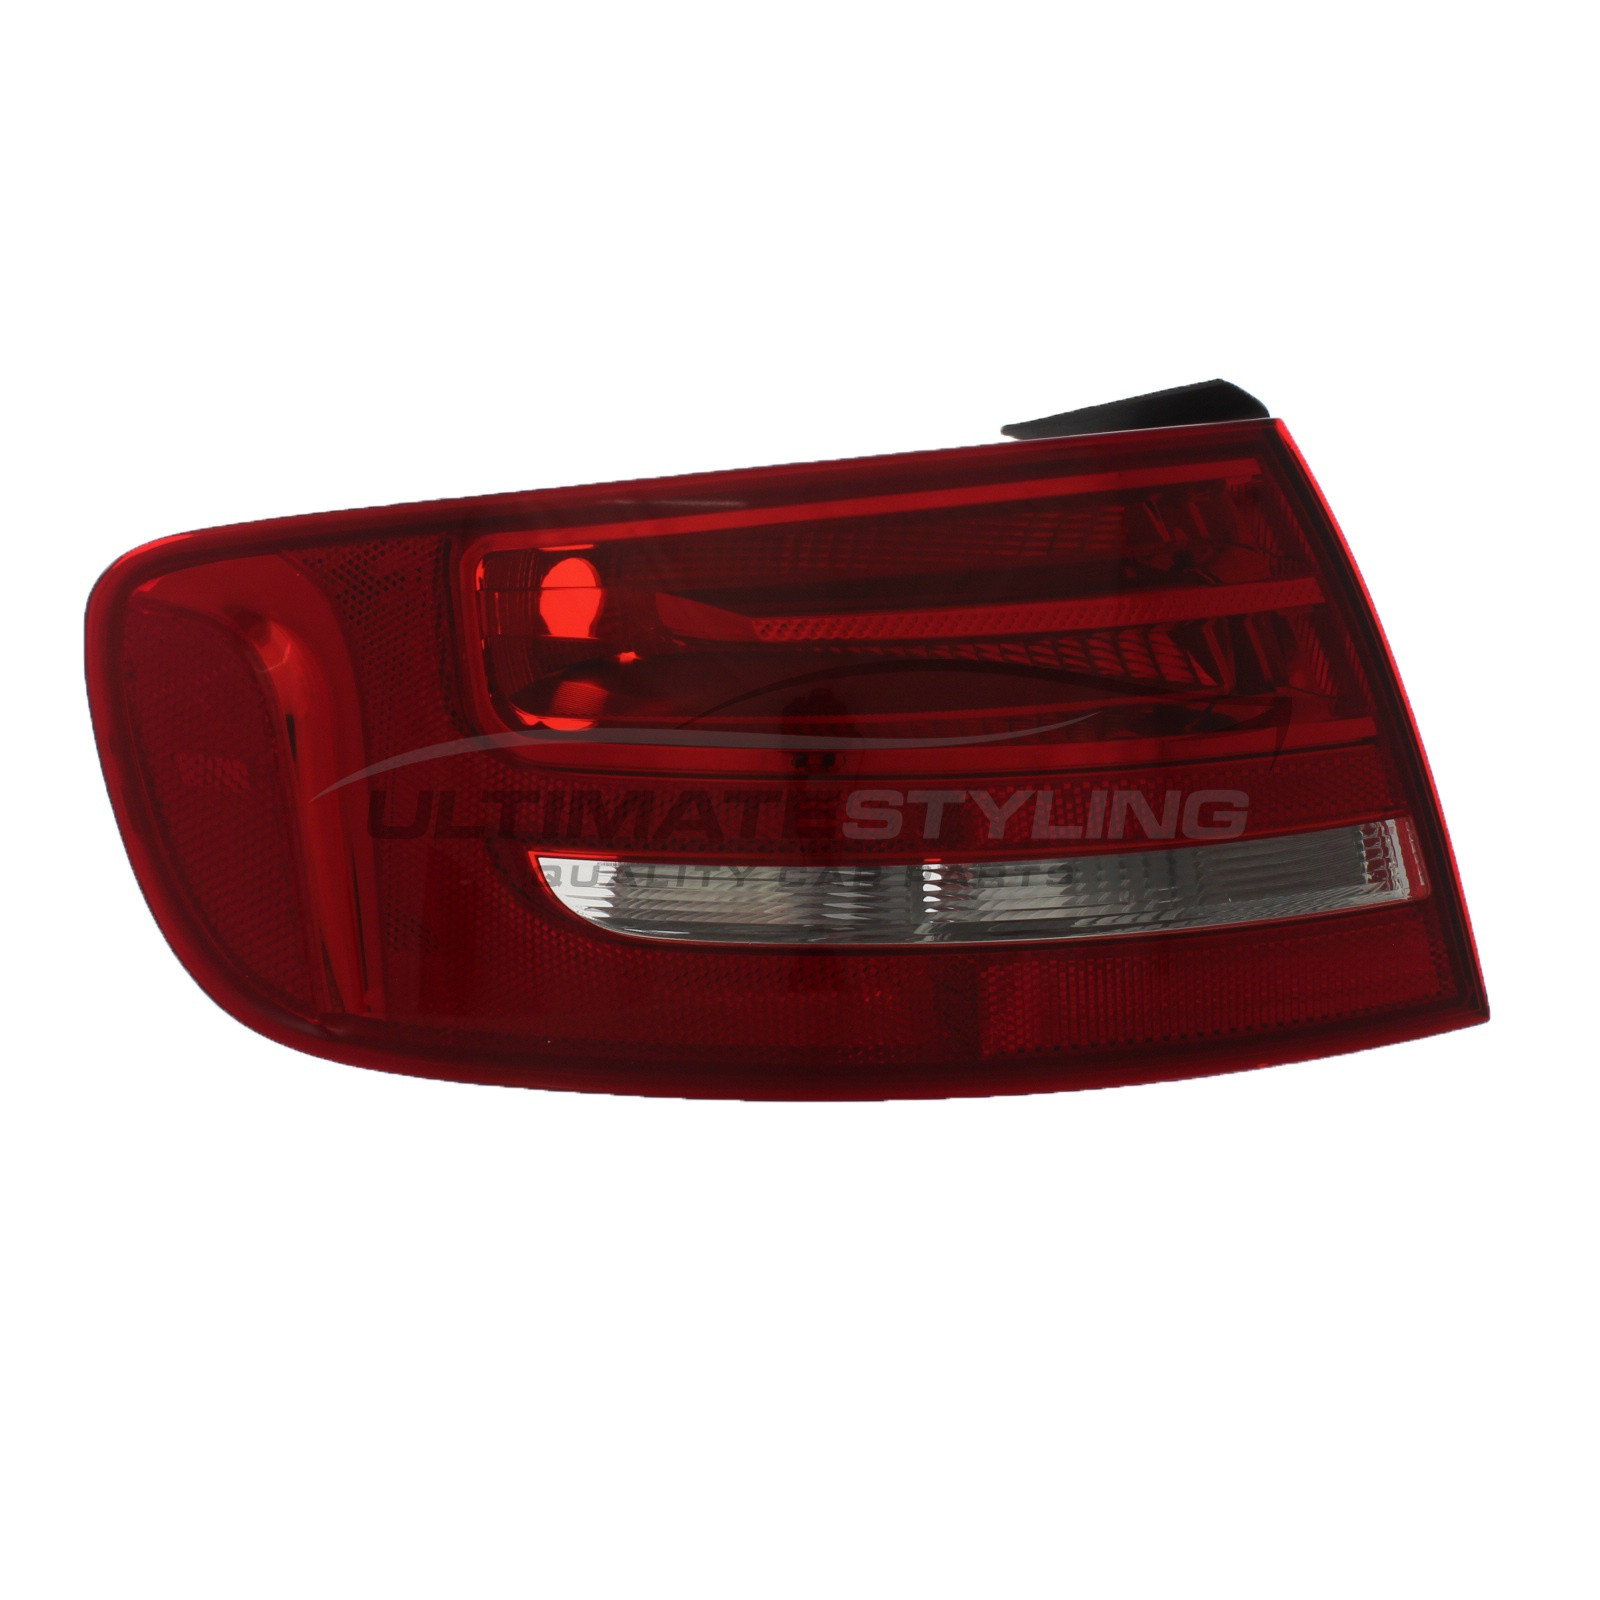 Audi A4 2008-2012 Non-LED Outer (Wing) Rear Light / Tail Light Excluding Bulb Holder Passenger Side (LH)